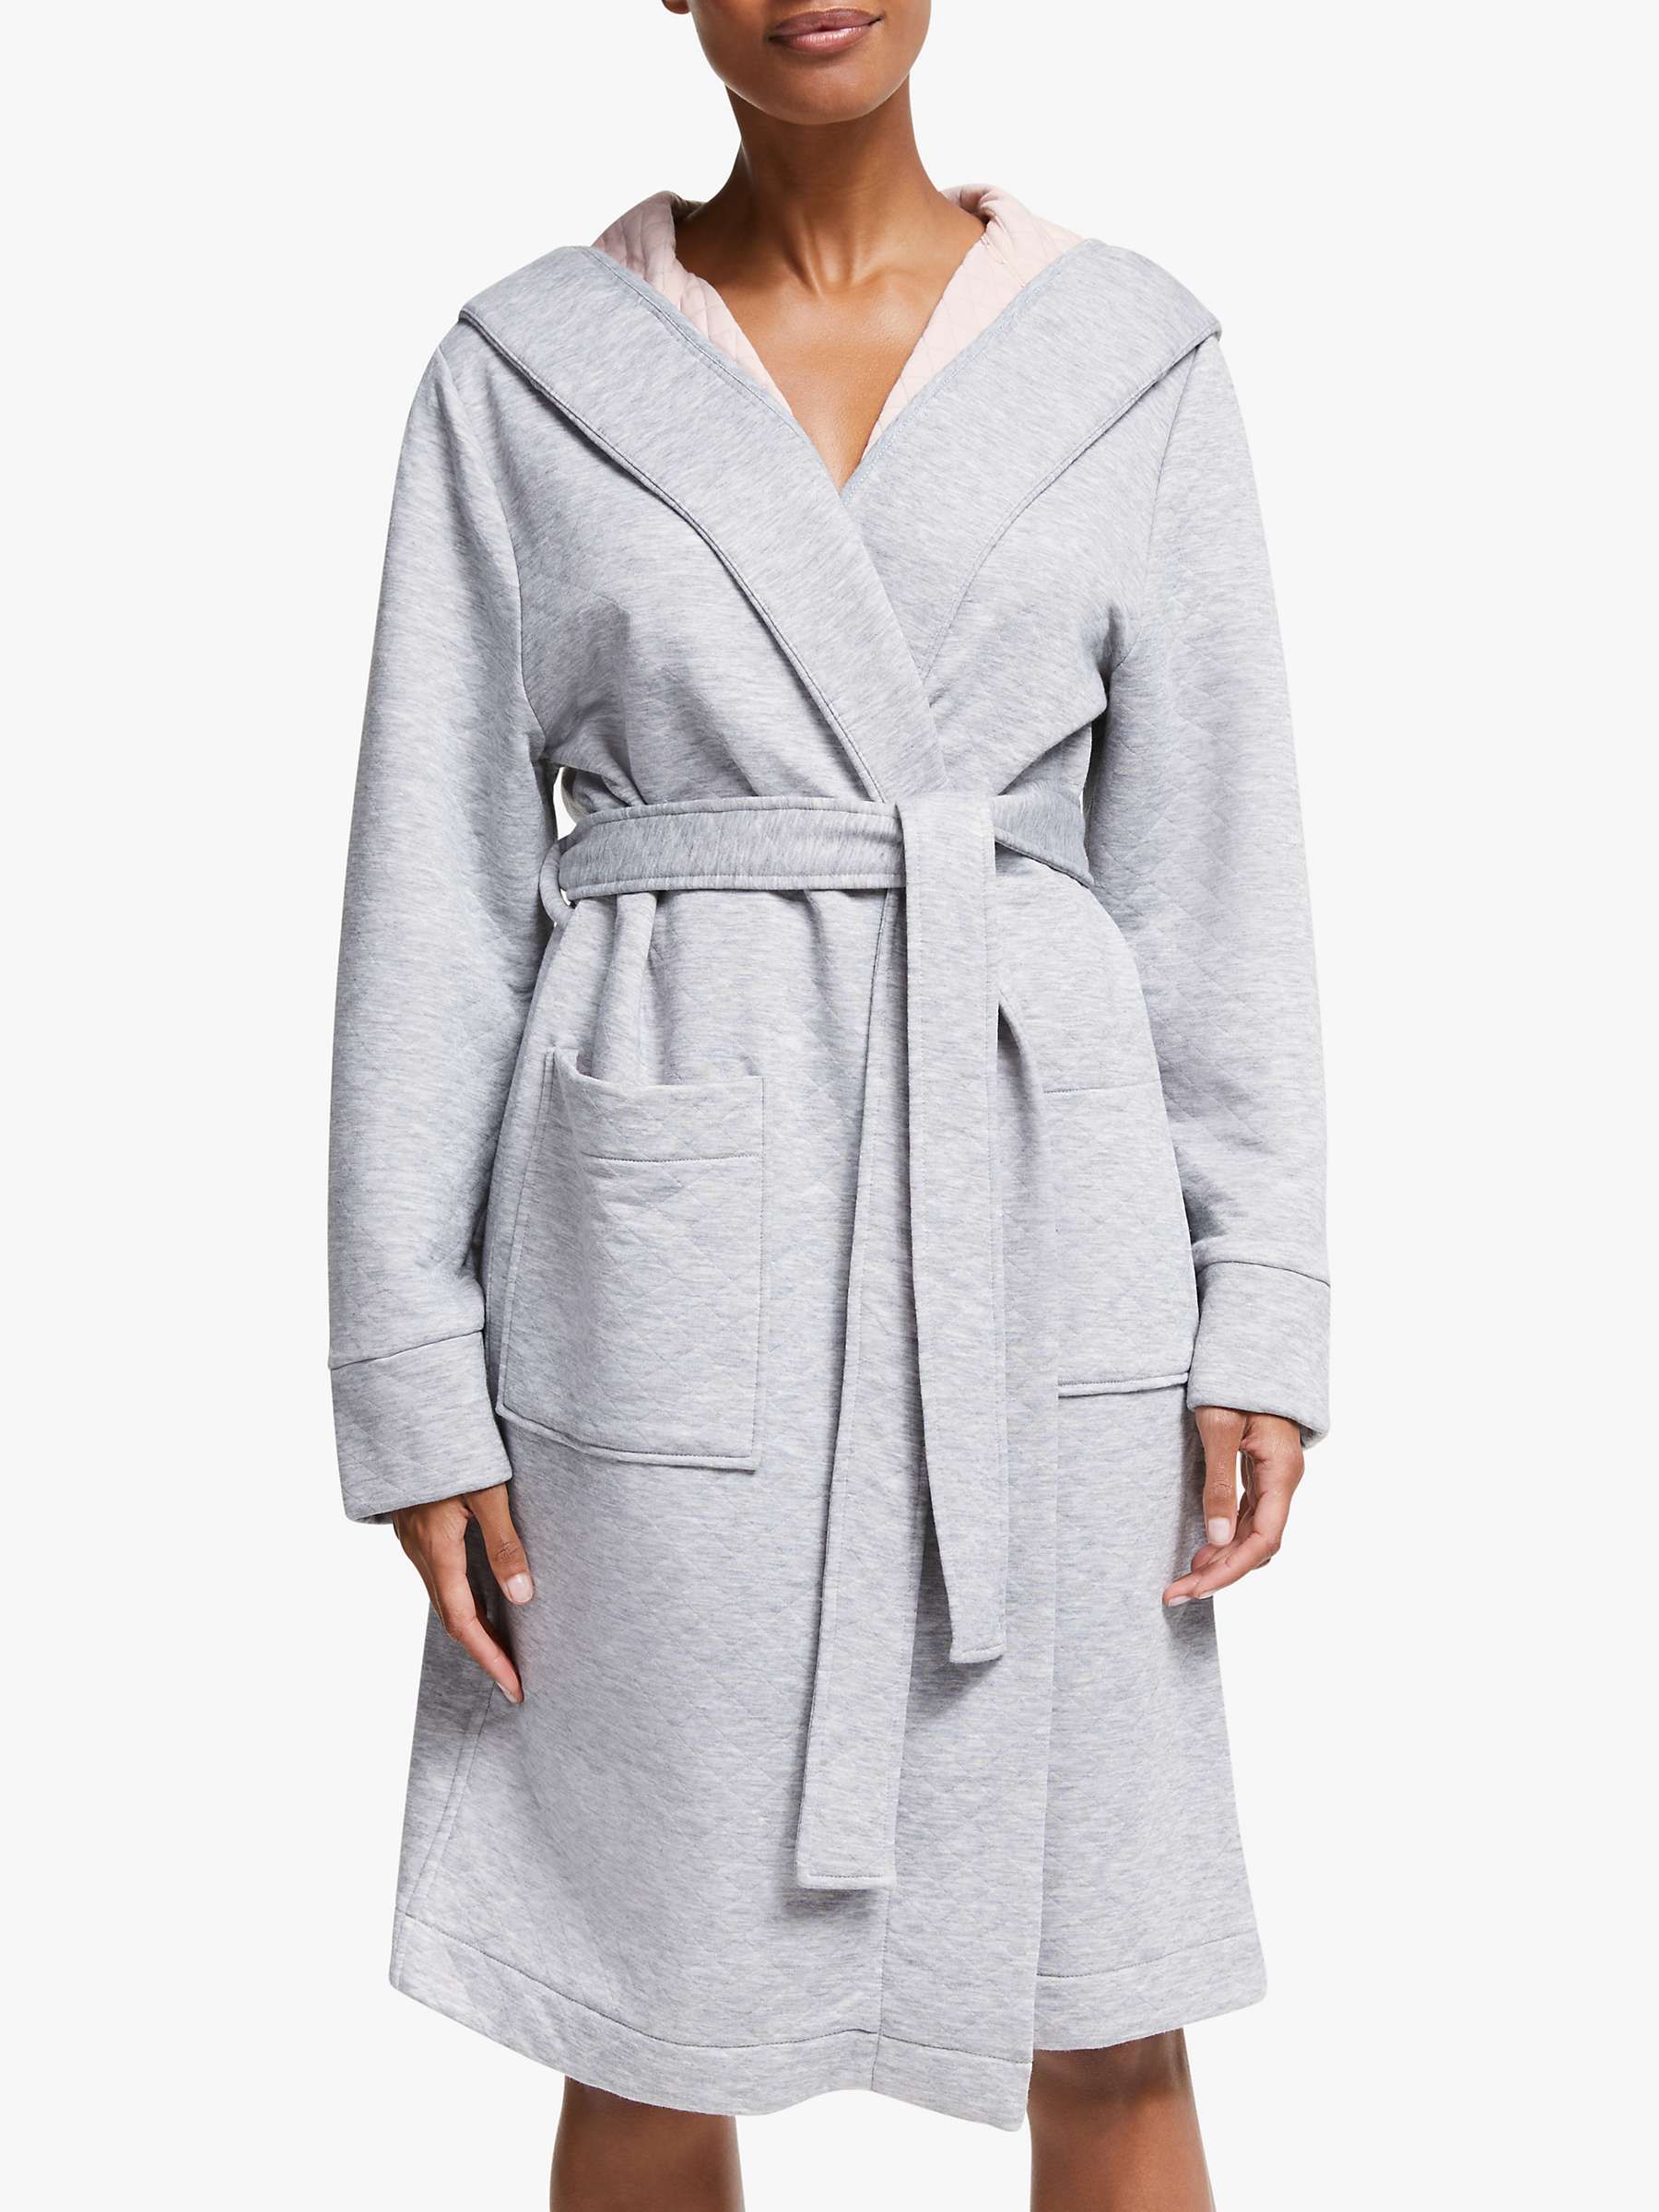 dressing gowns for sale online